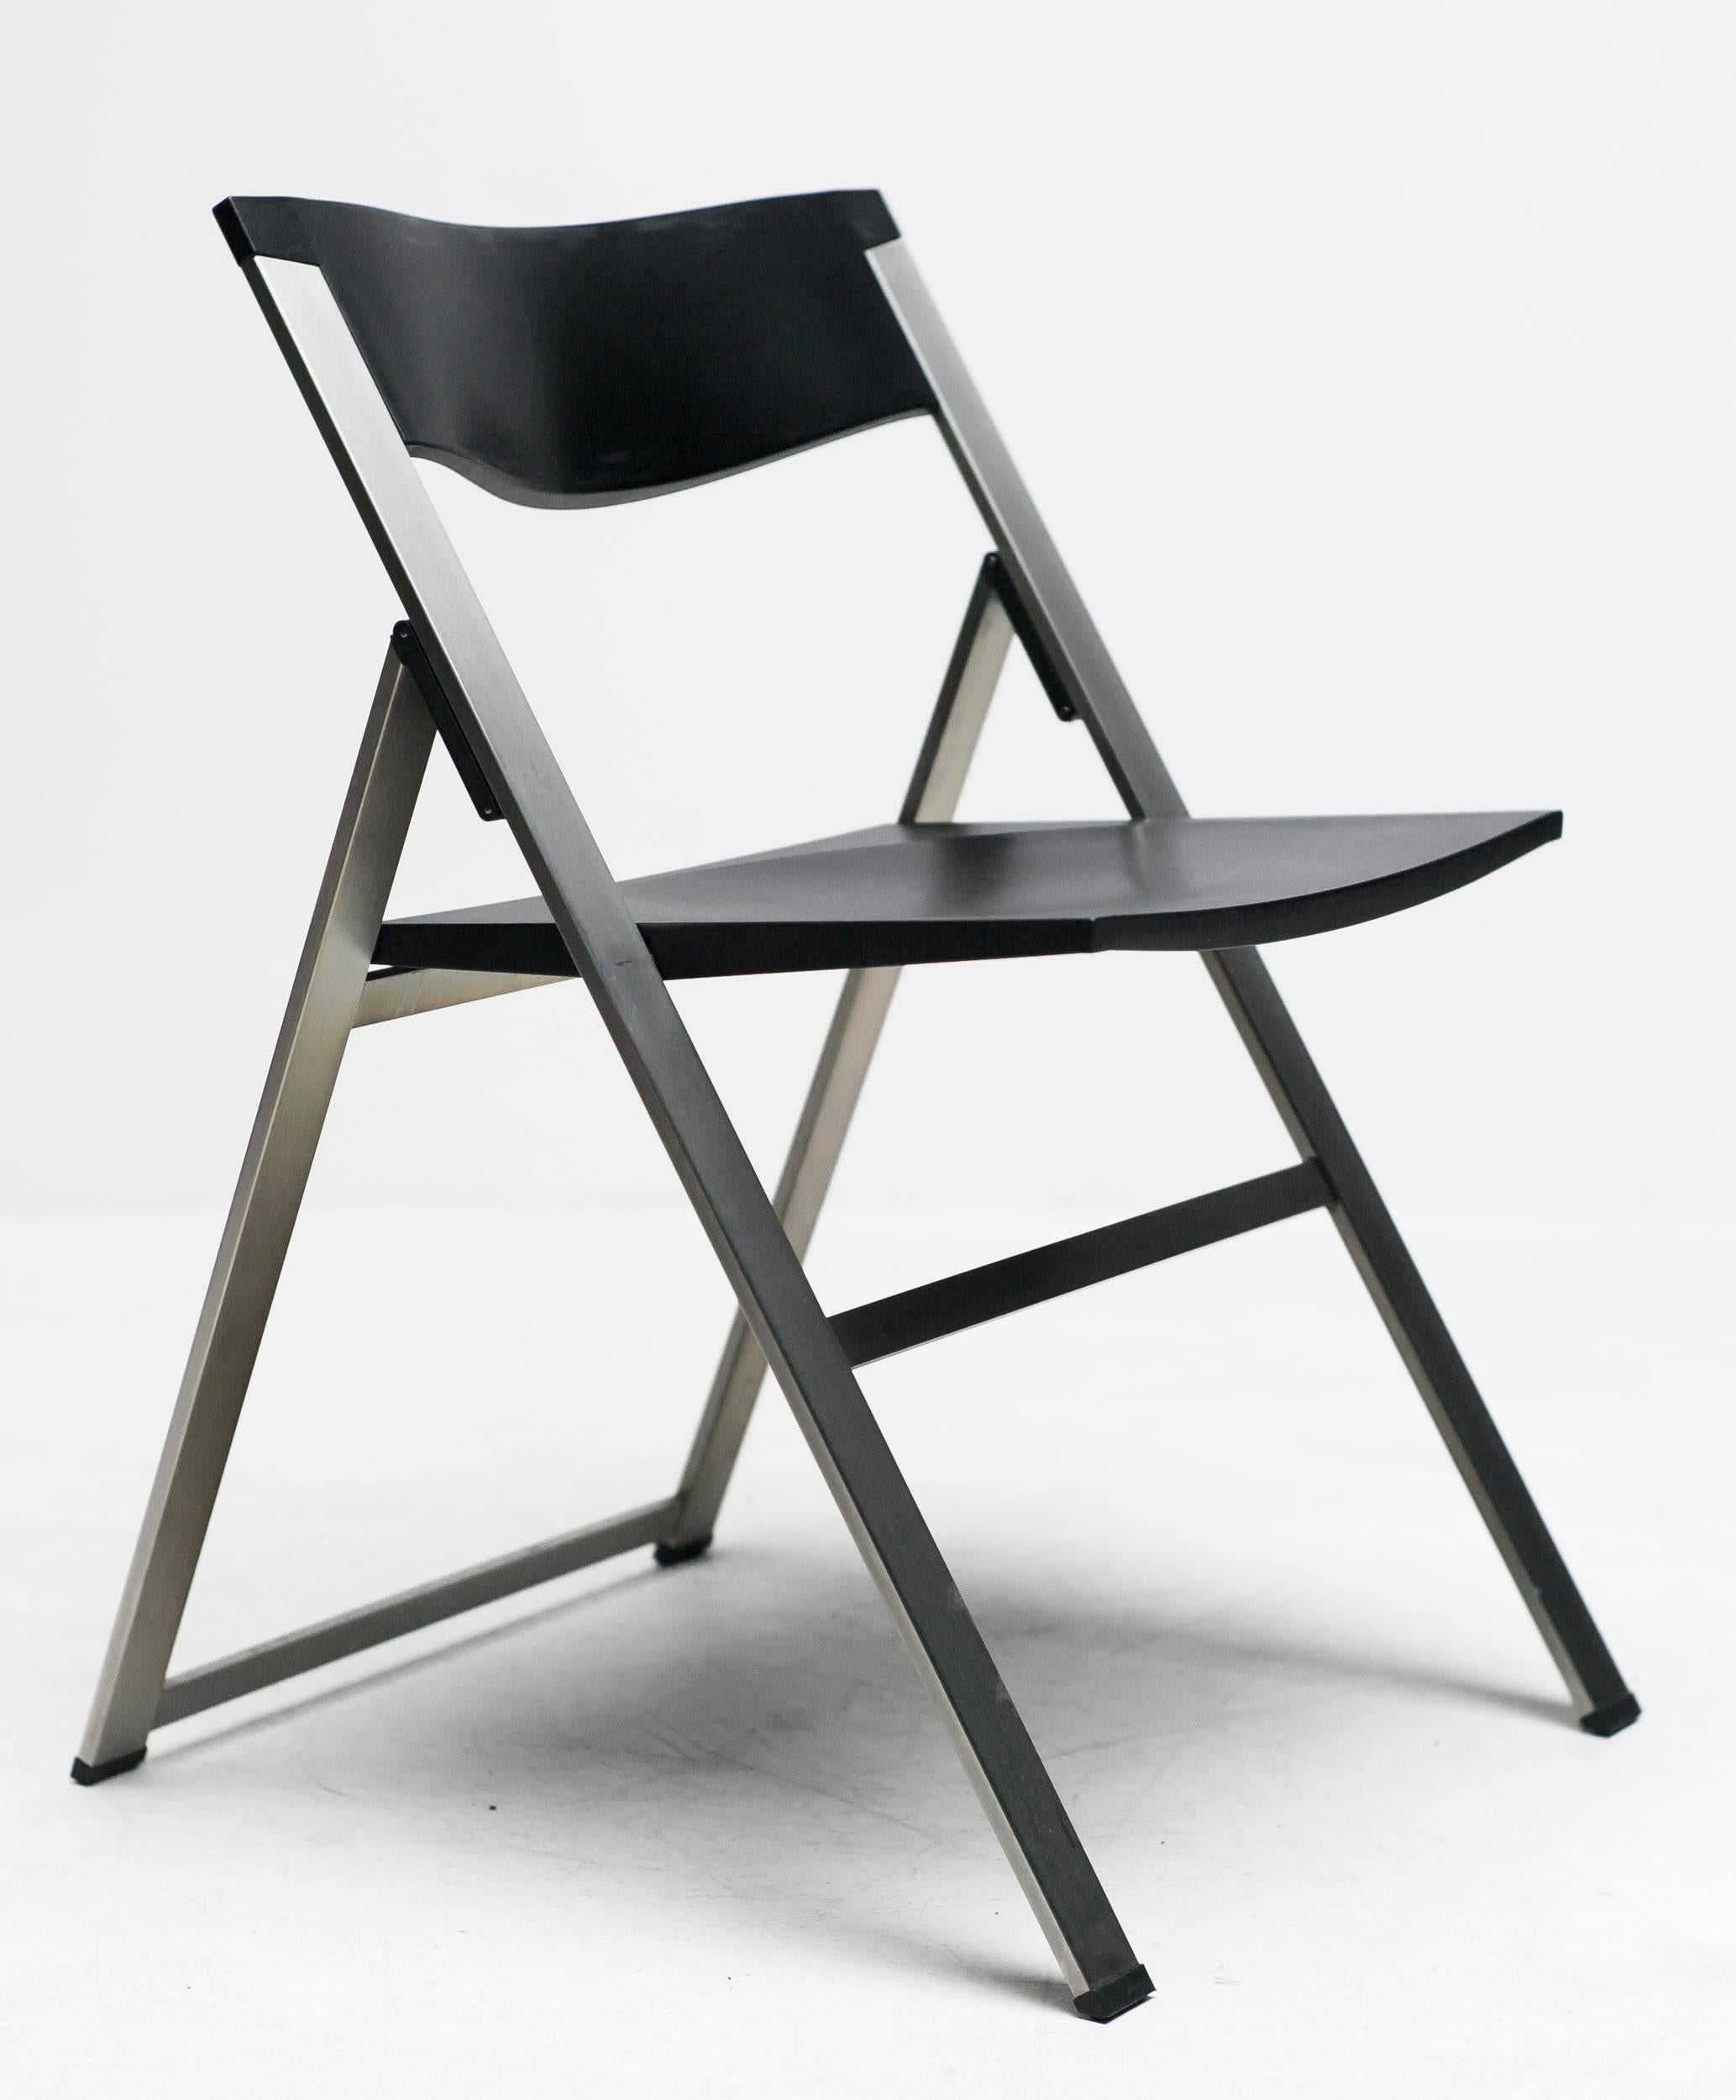 The structure consists of a satin finished stainless steel frame. The seat and backrest are made in black polyamide. They are very comfortable and fold completely flat.

Excellent fast and affordable worldwide shipping available.